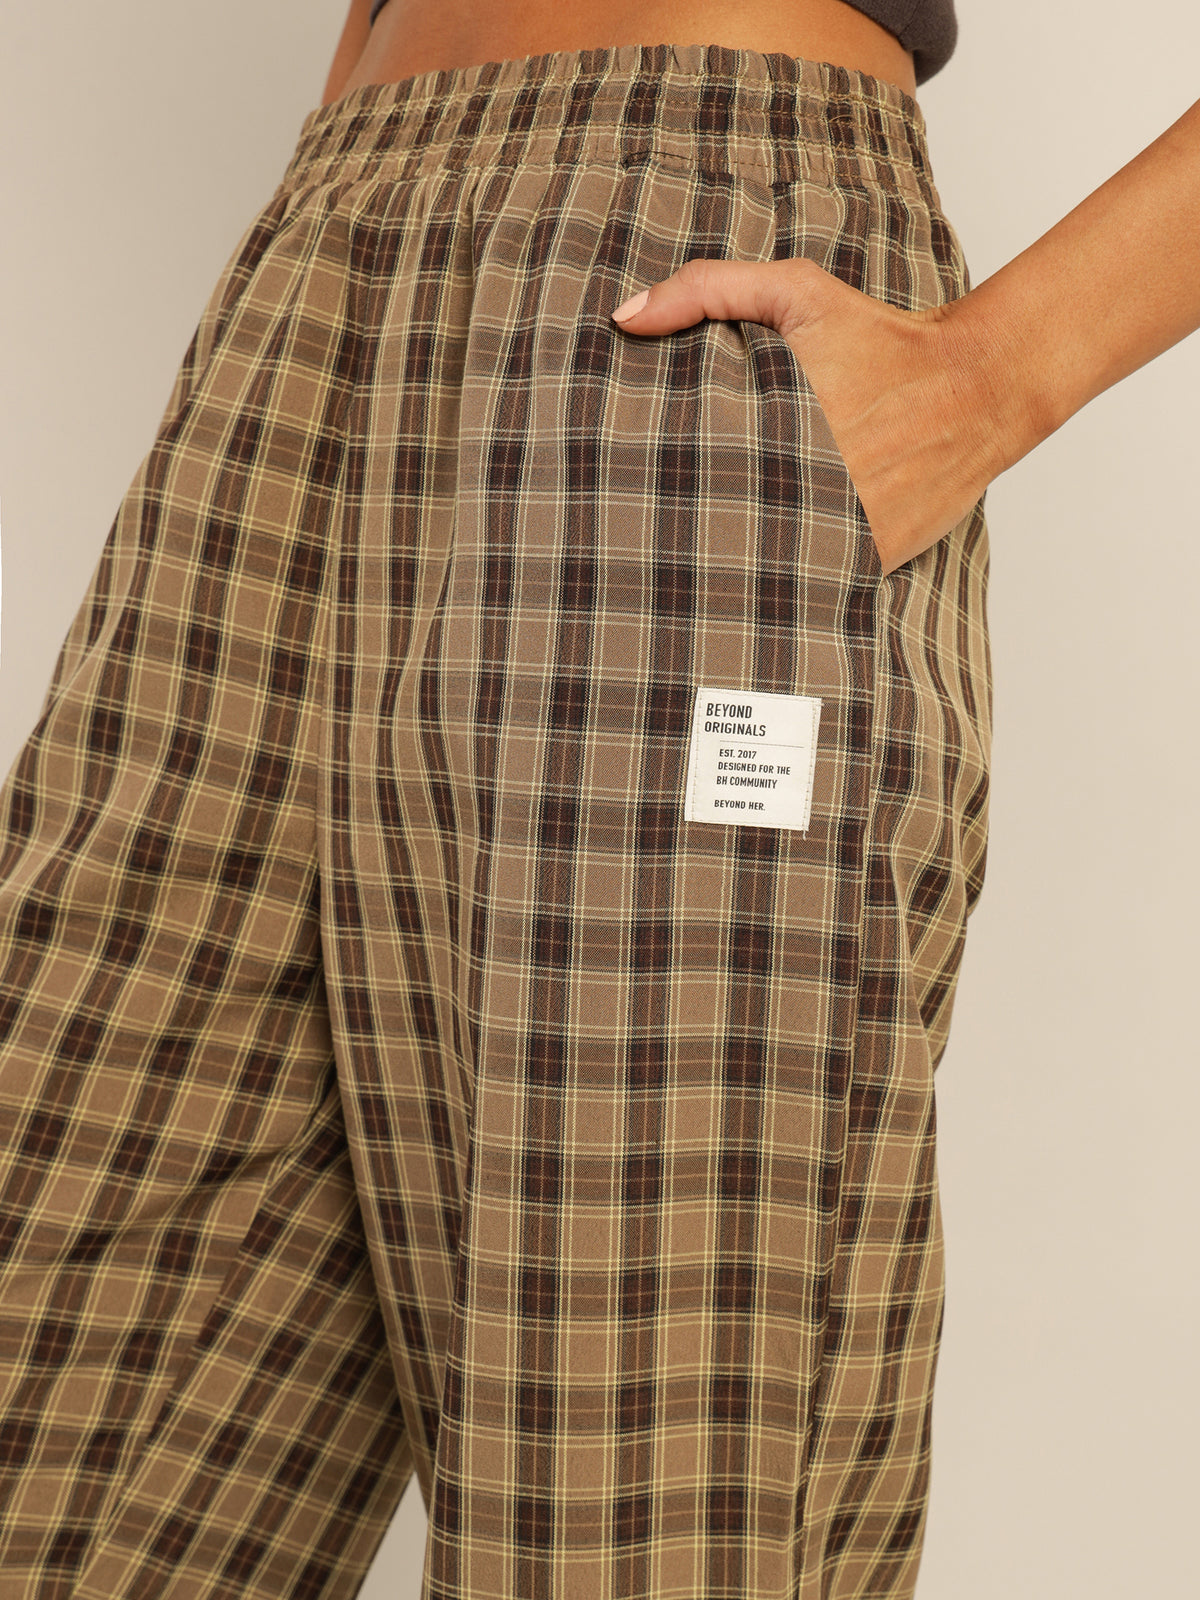 Adley Check Pants in Brown Check